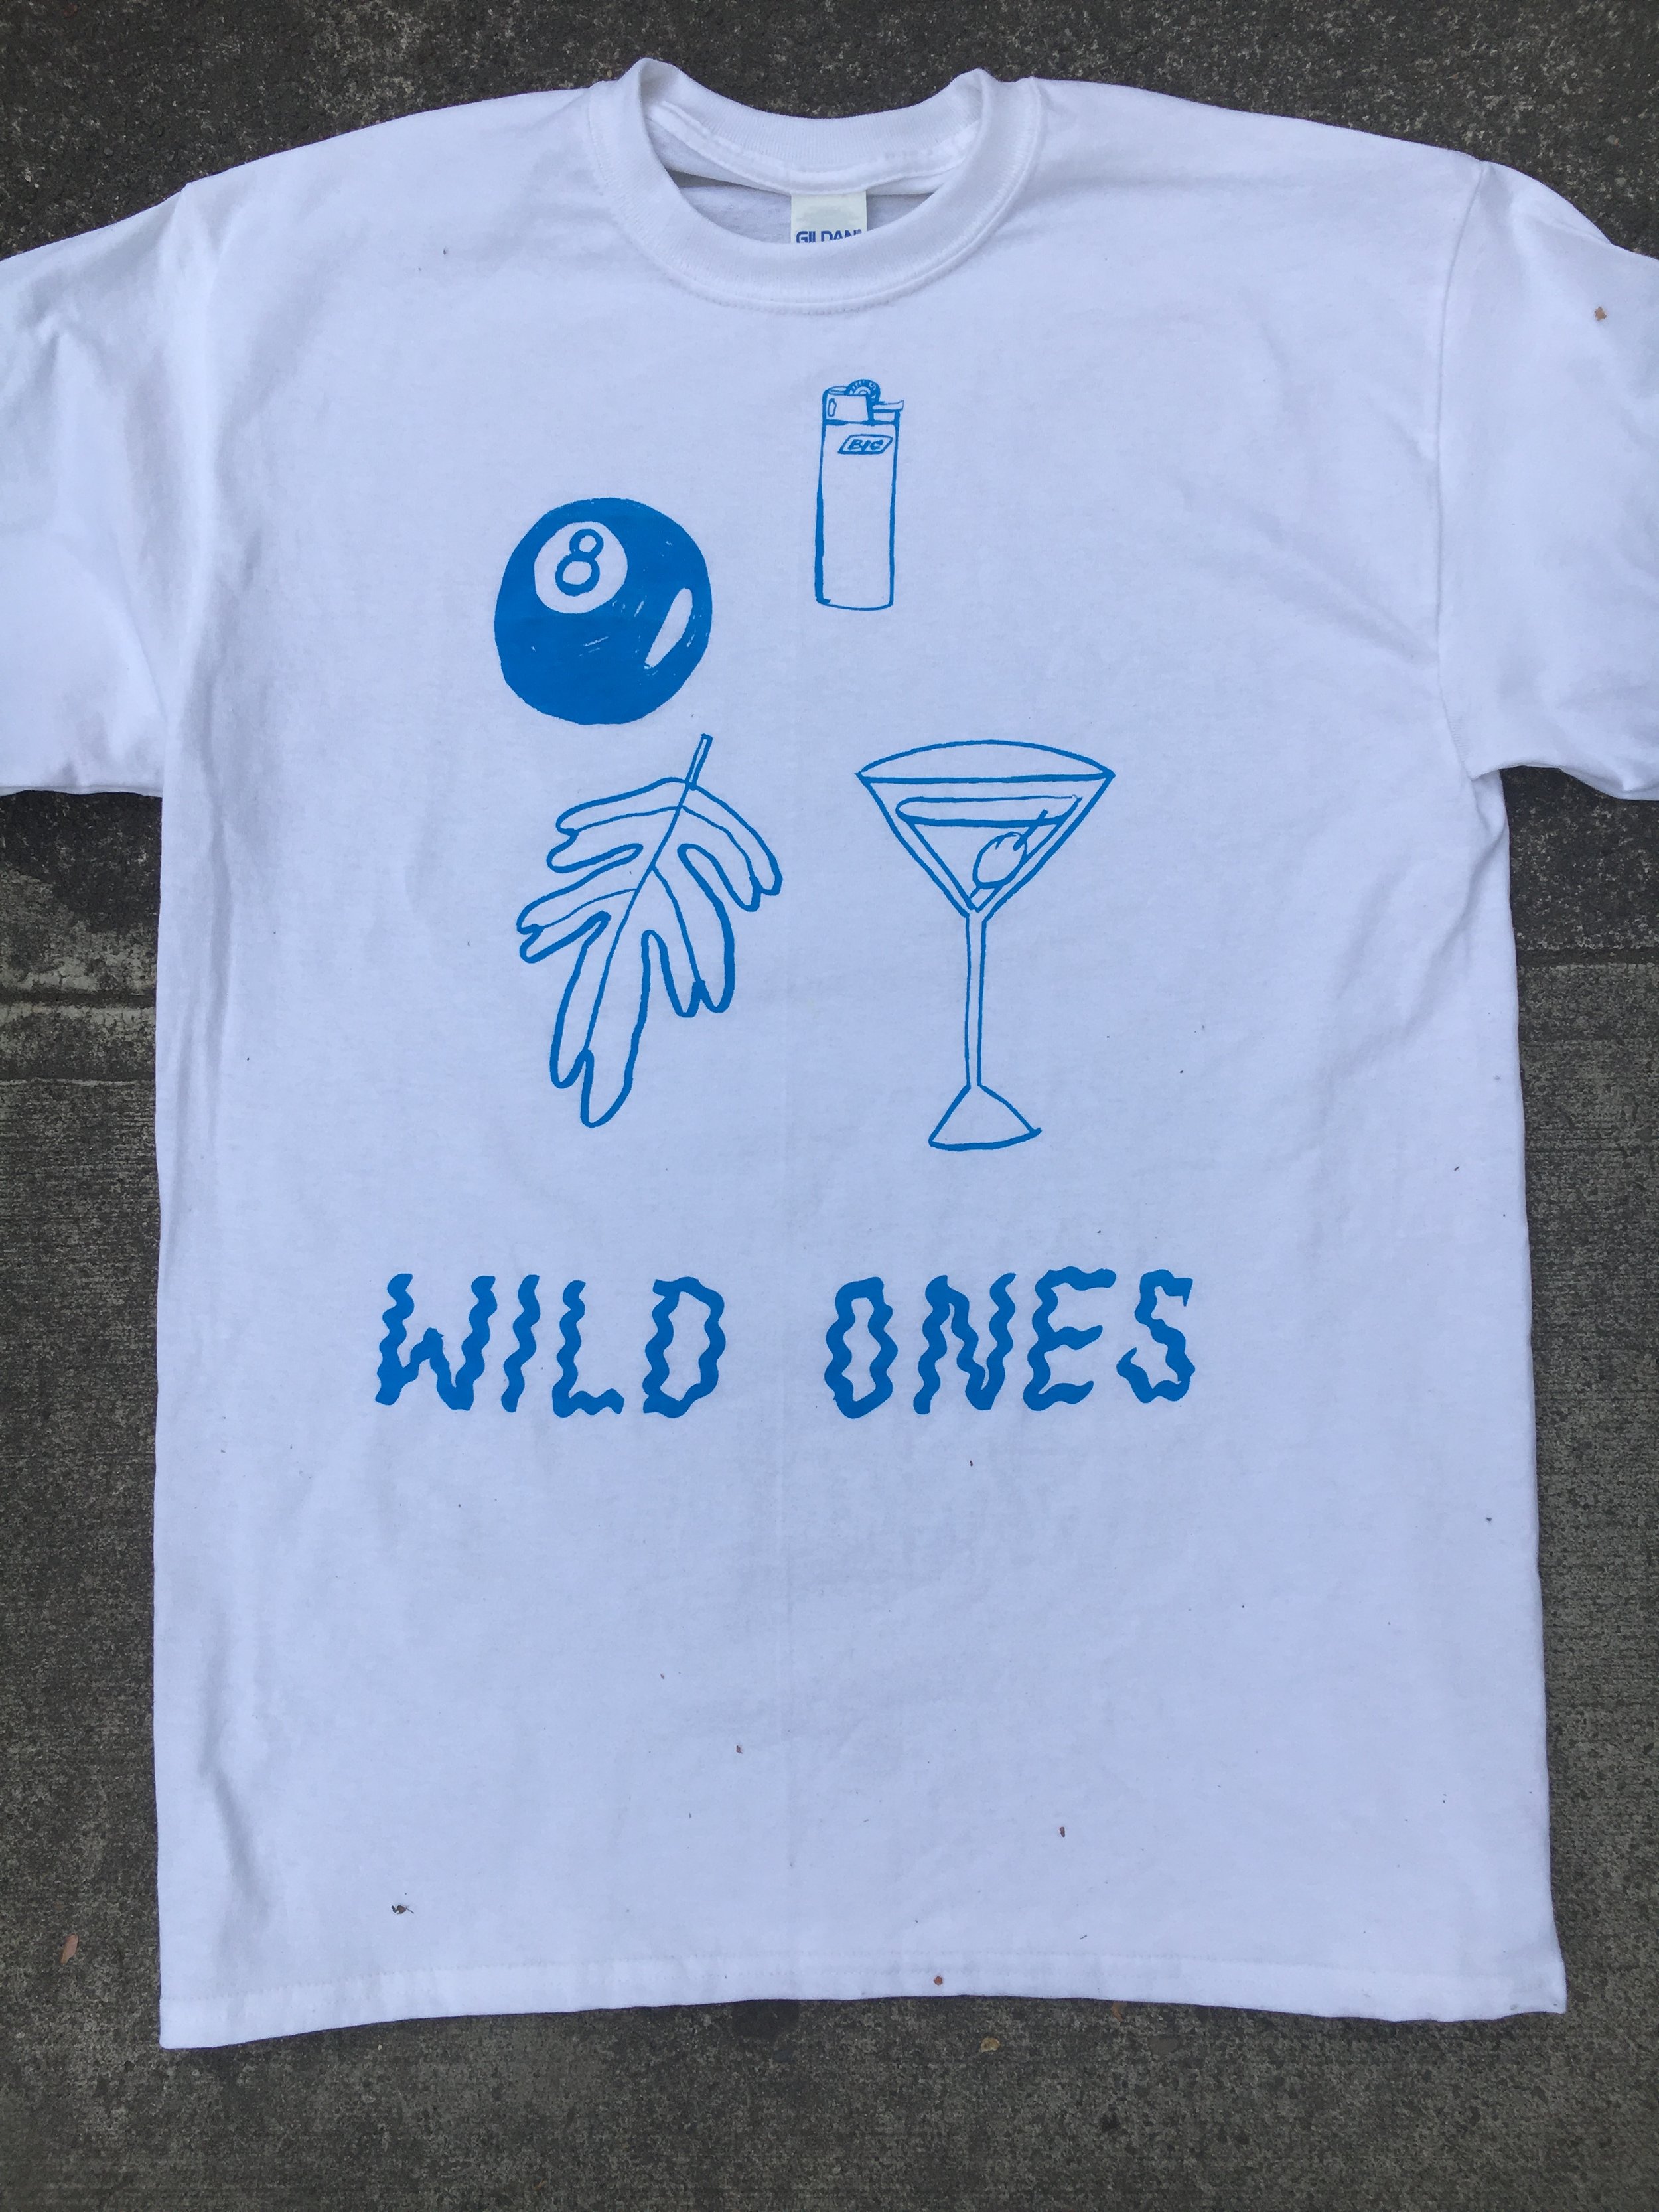  Custom mixed “matisse blue” print for Wild Ones from Portland, OR 